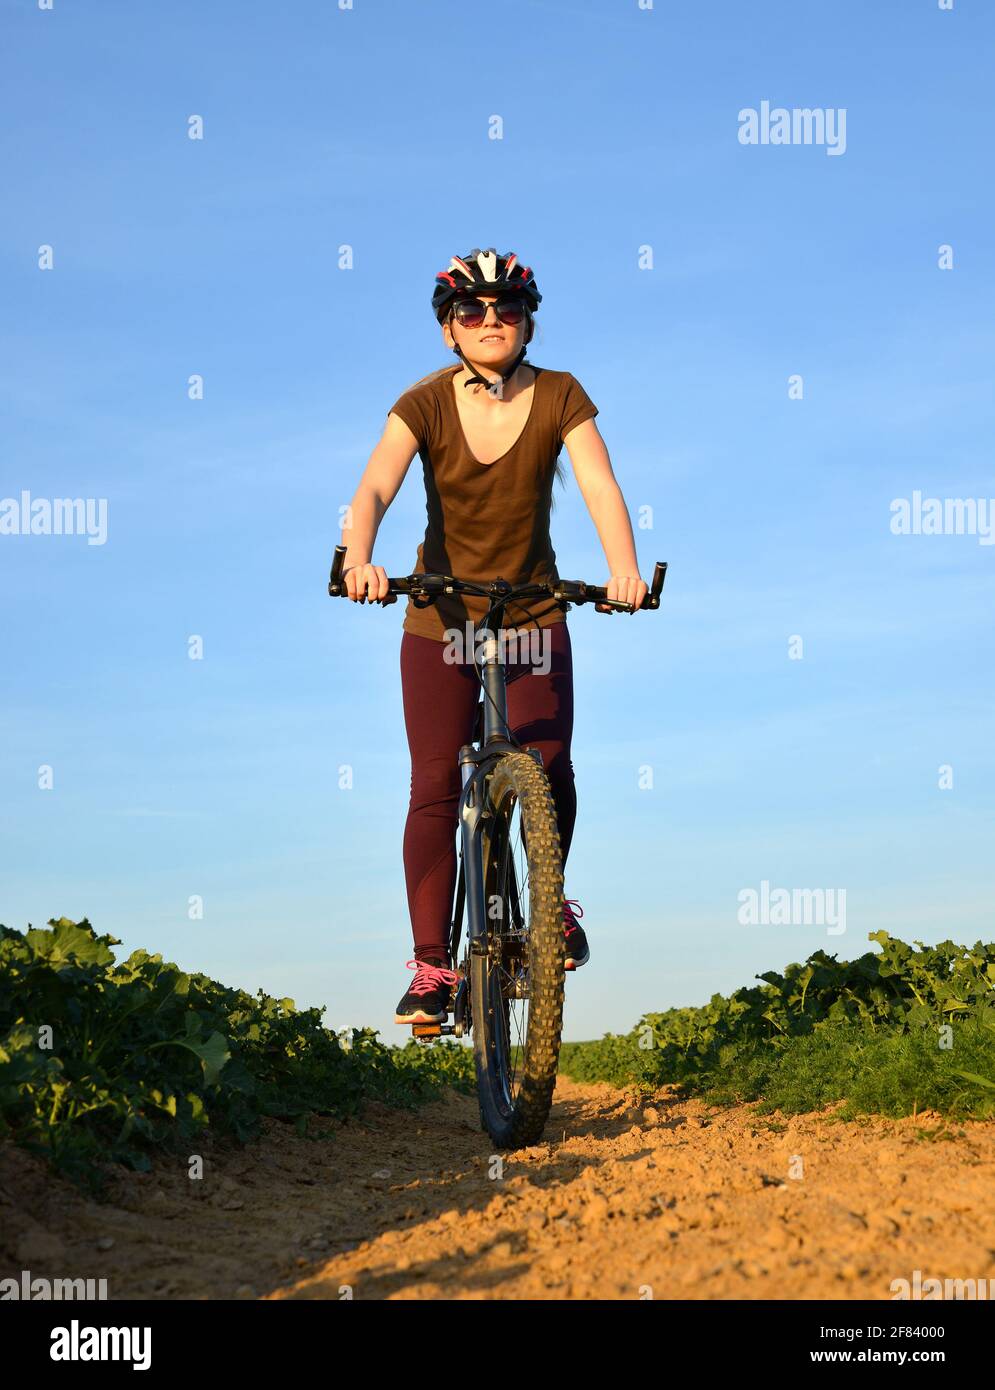 Girl riding a bike on a dirt road. Stock Photo